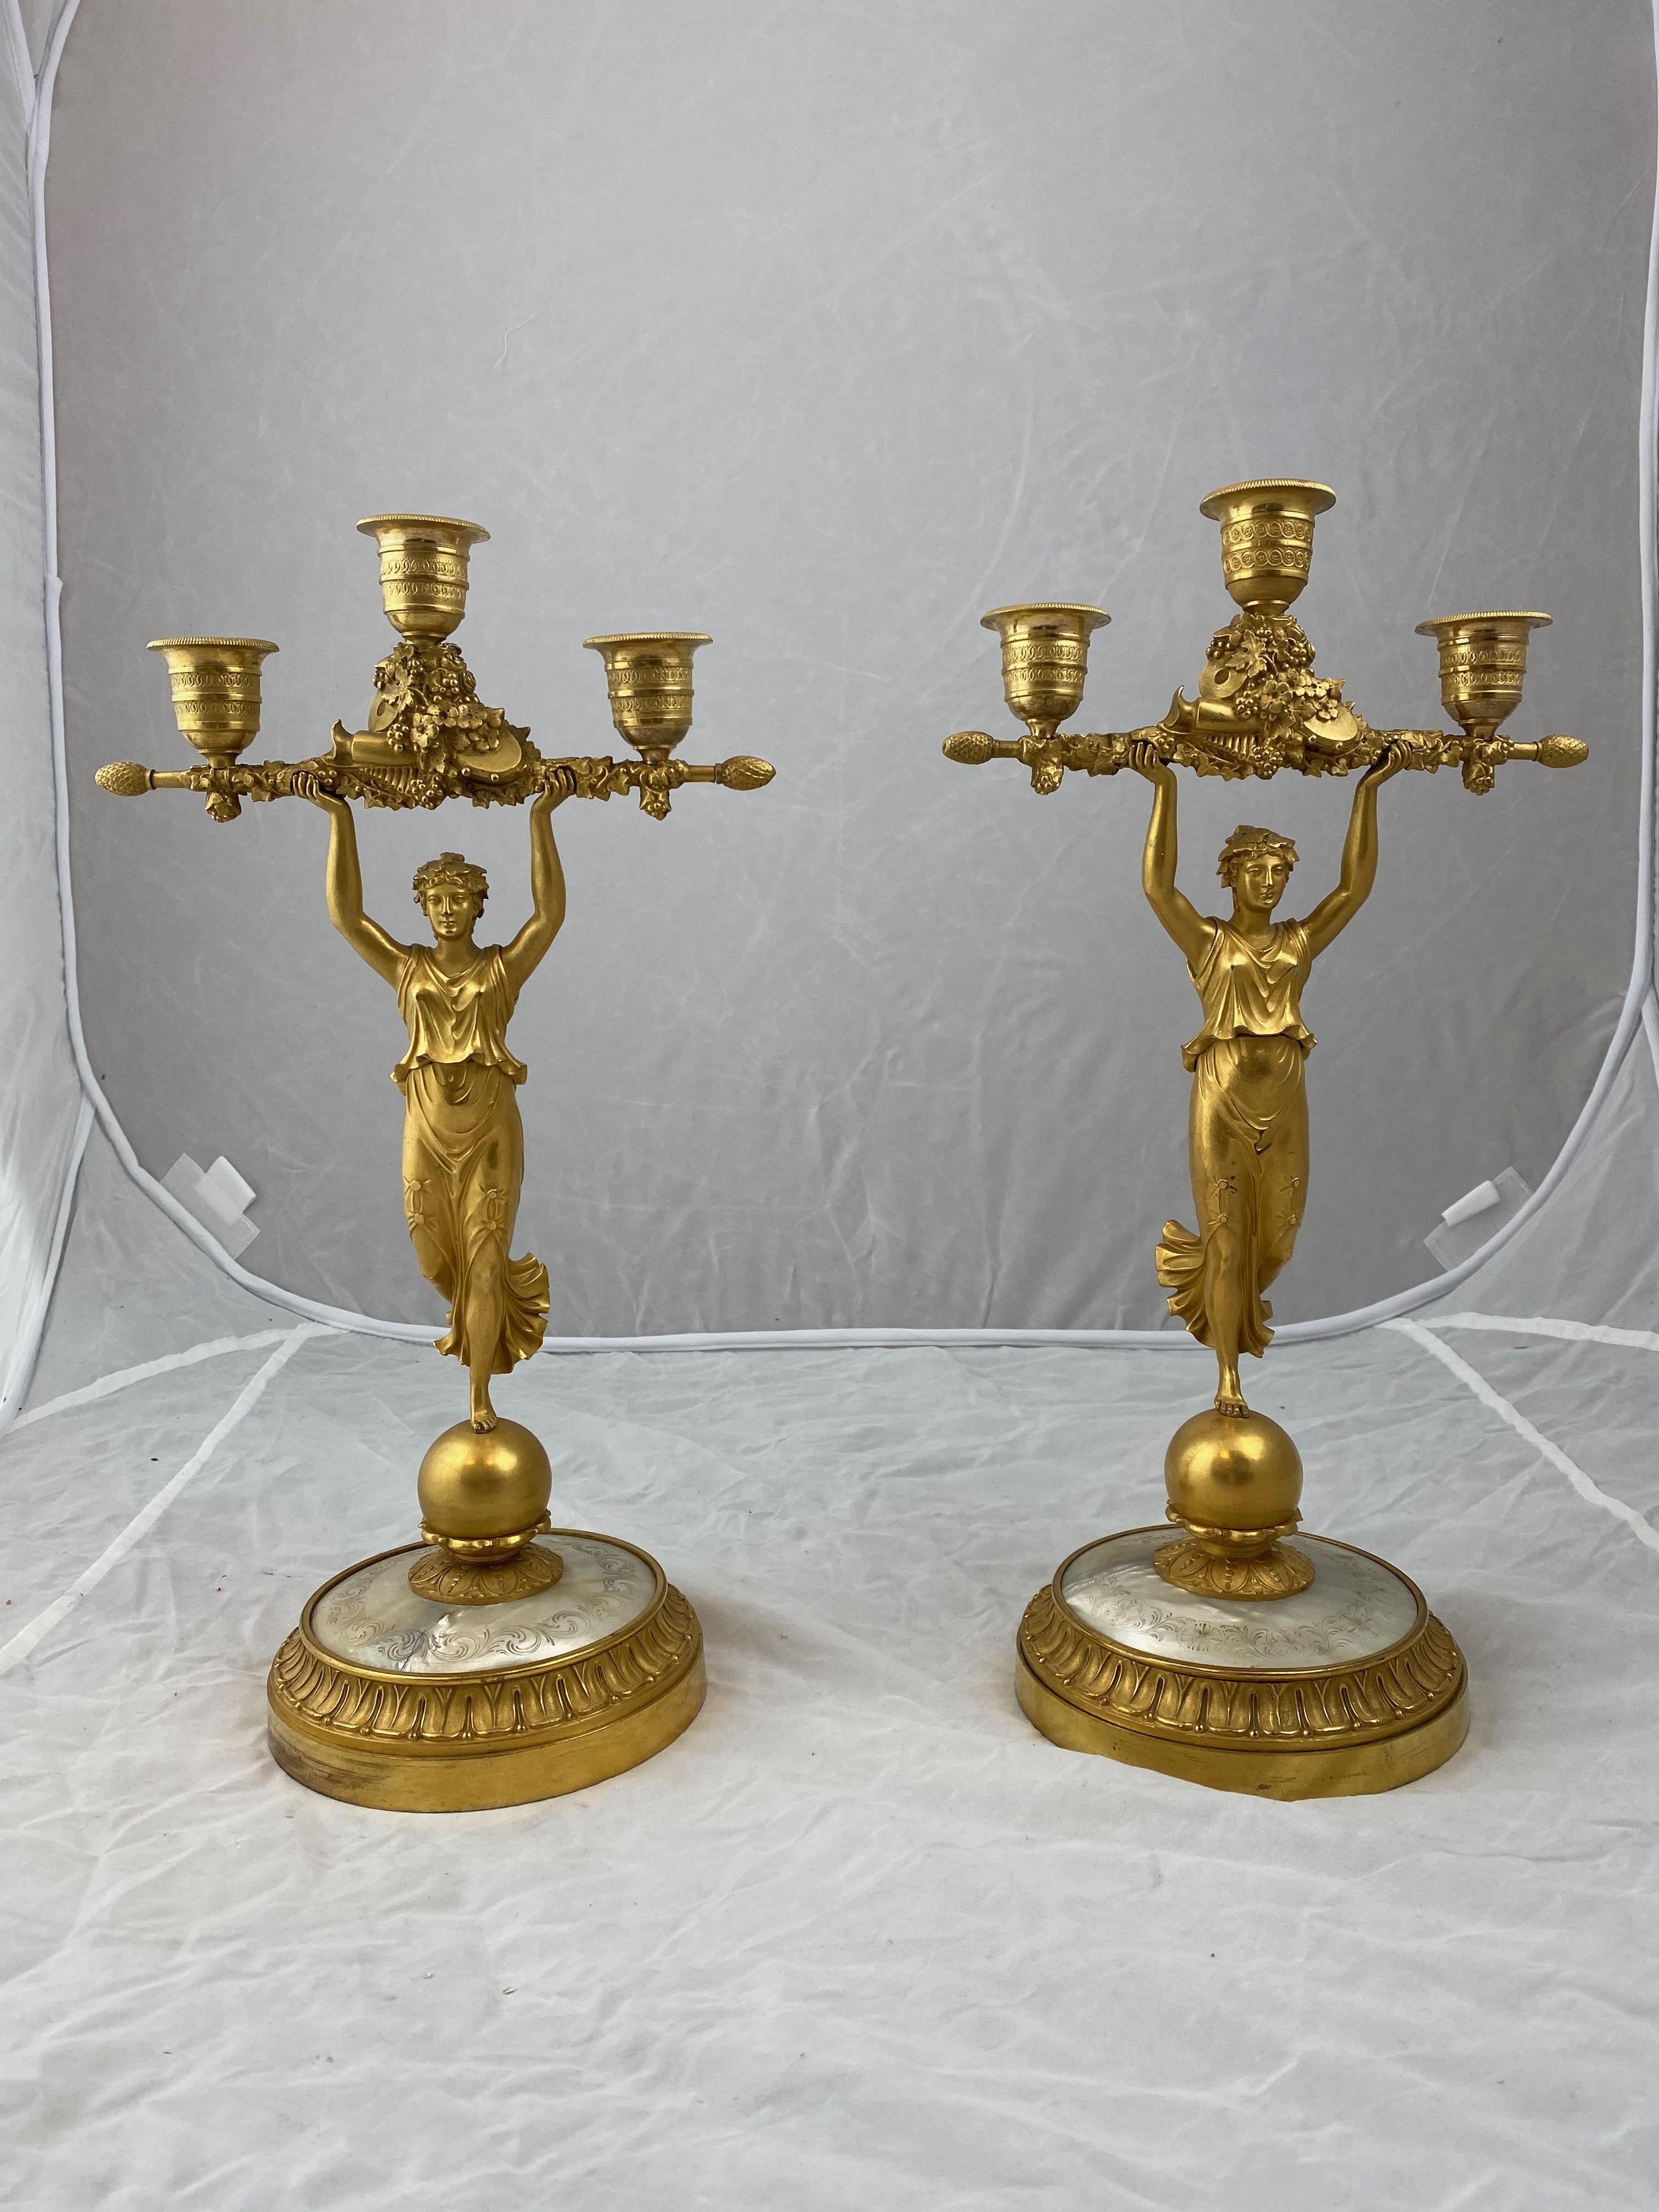 An unusual model with a Classic female figure standing holding a bar with three candleholders on it. The candelabra are made of gilt bronze and the feet are covered with ornamented mother of pearl.